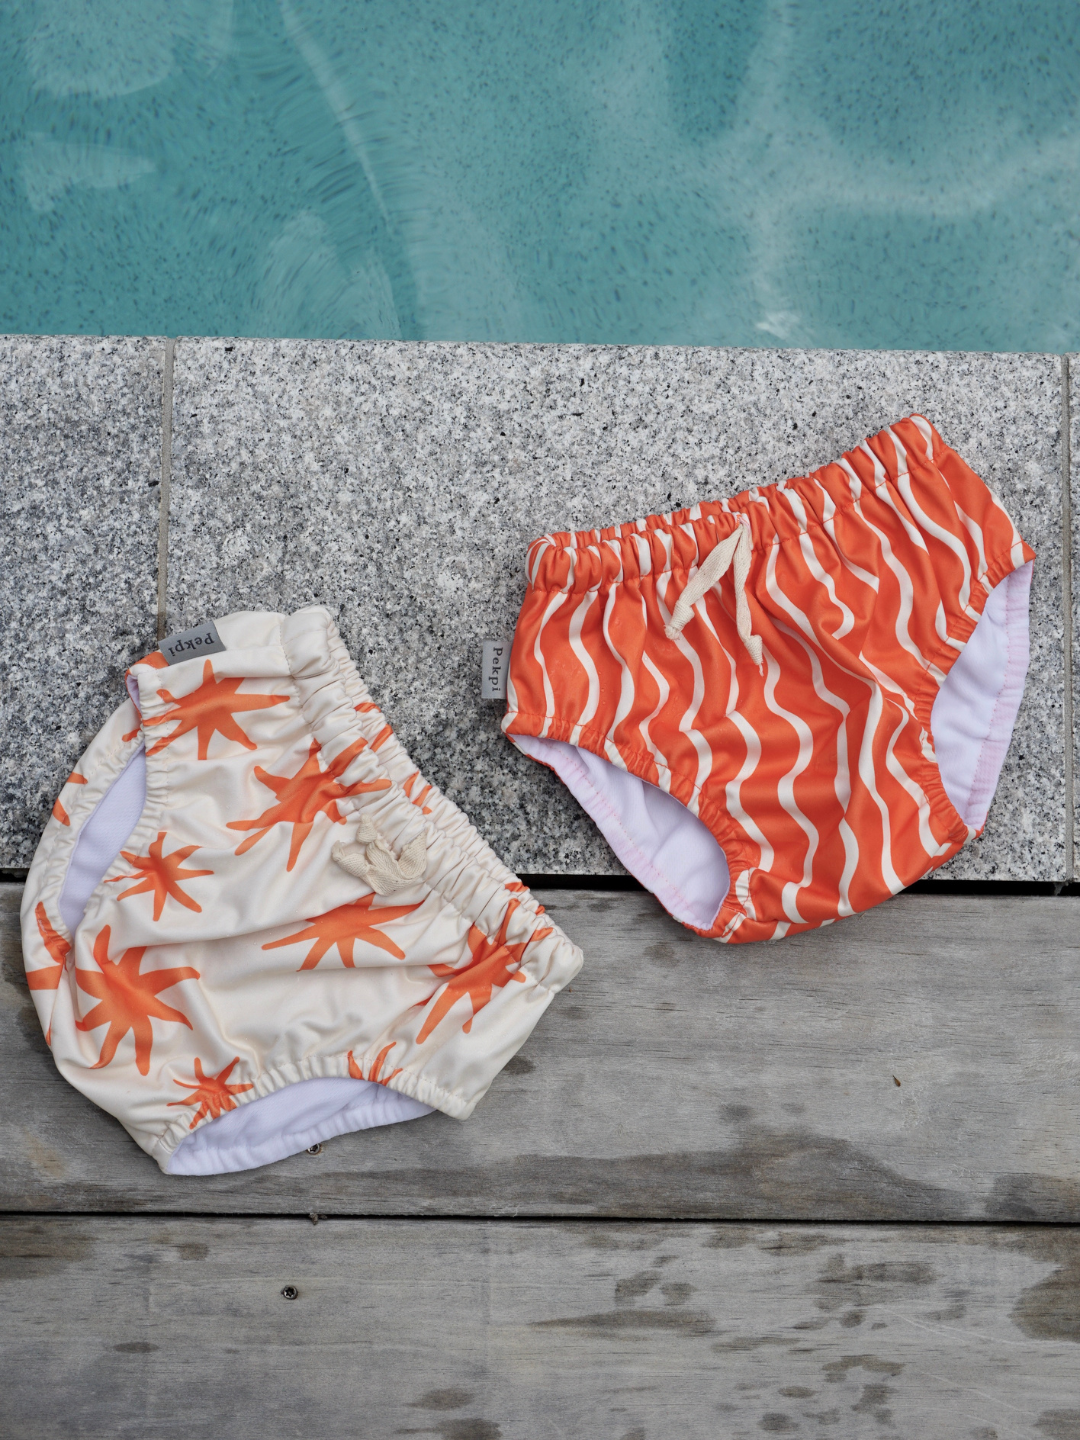 Capri | The front view of the swim diaper with an elastic waist with a tie and elastic leg holes. The diaper is a cream color with orange stars shapes all over. It's laid on the ground next to a pool with the Spaghetti Swim Diaper.